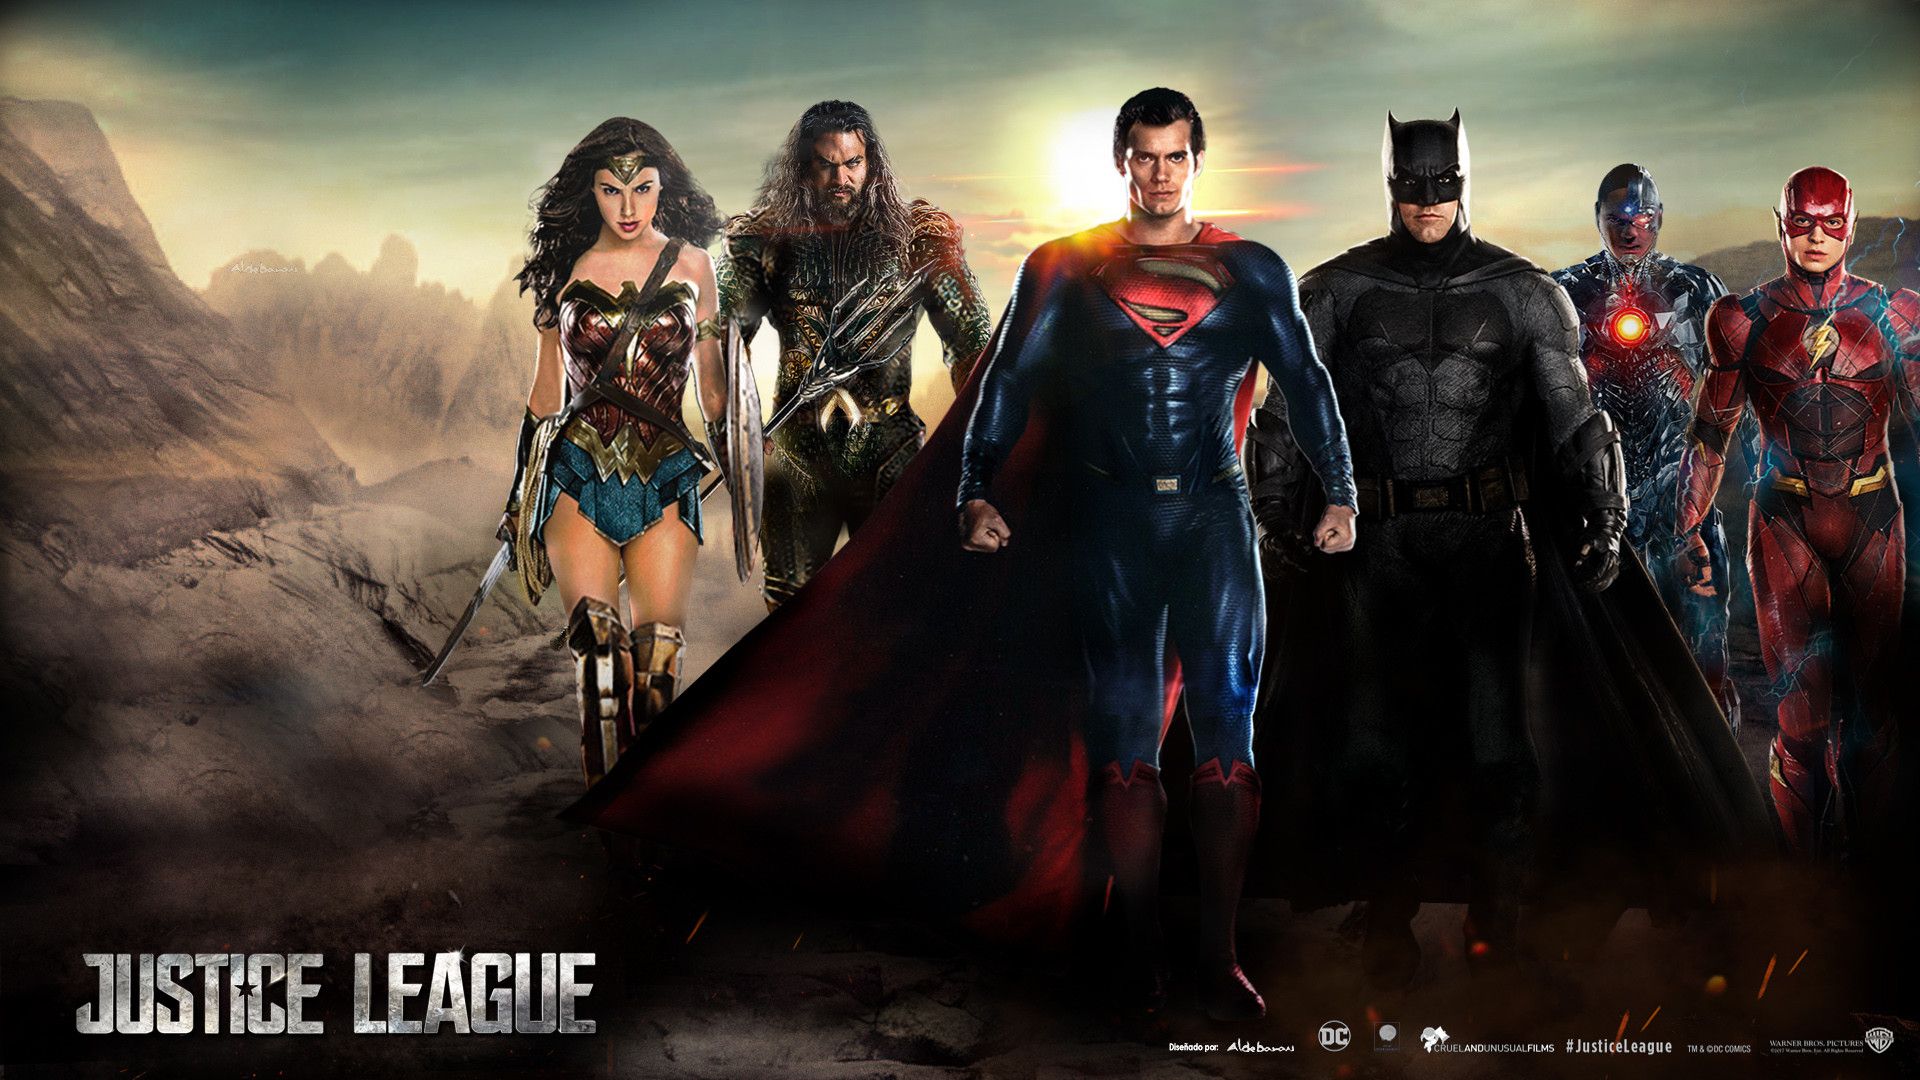 Justice League Wallpaper background picture